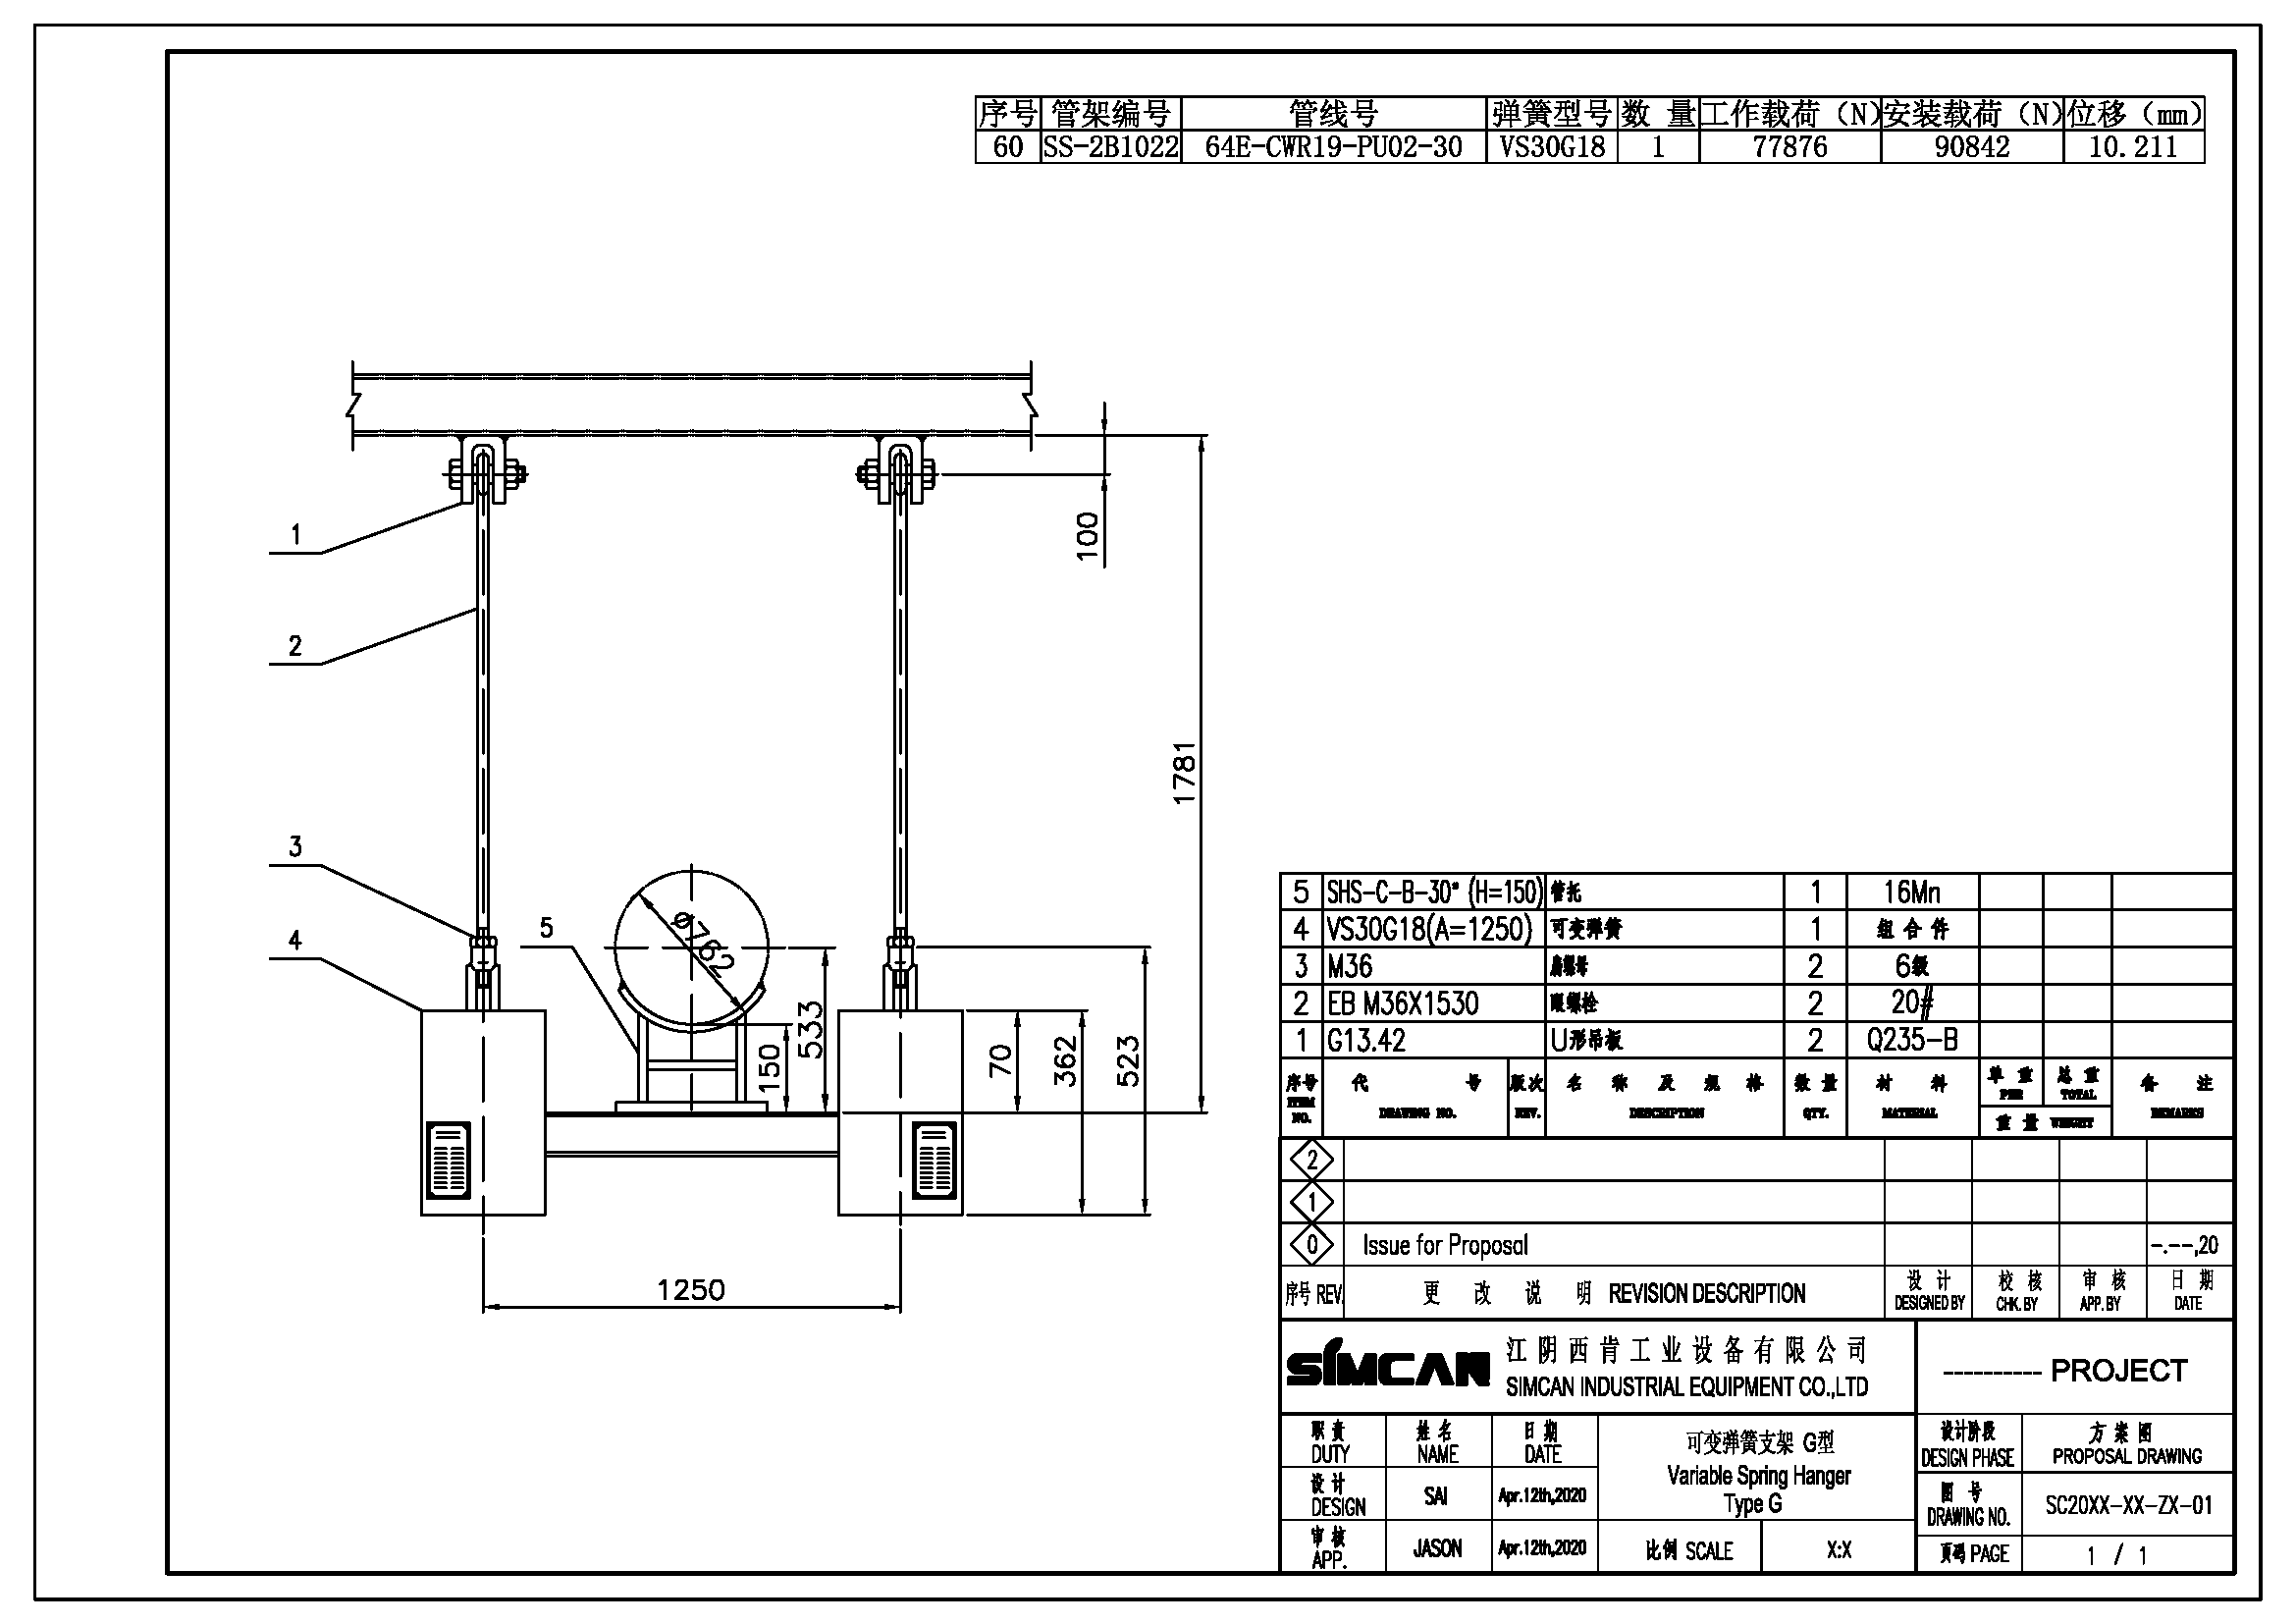 Type G Variable Spring support and Hanger